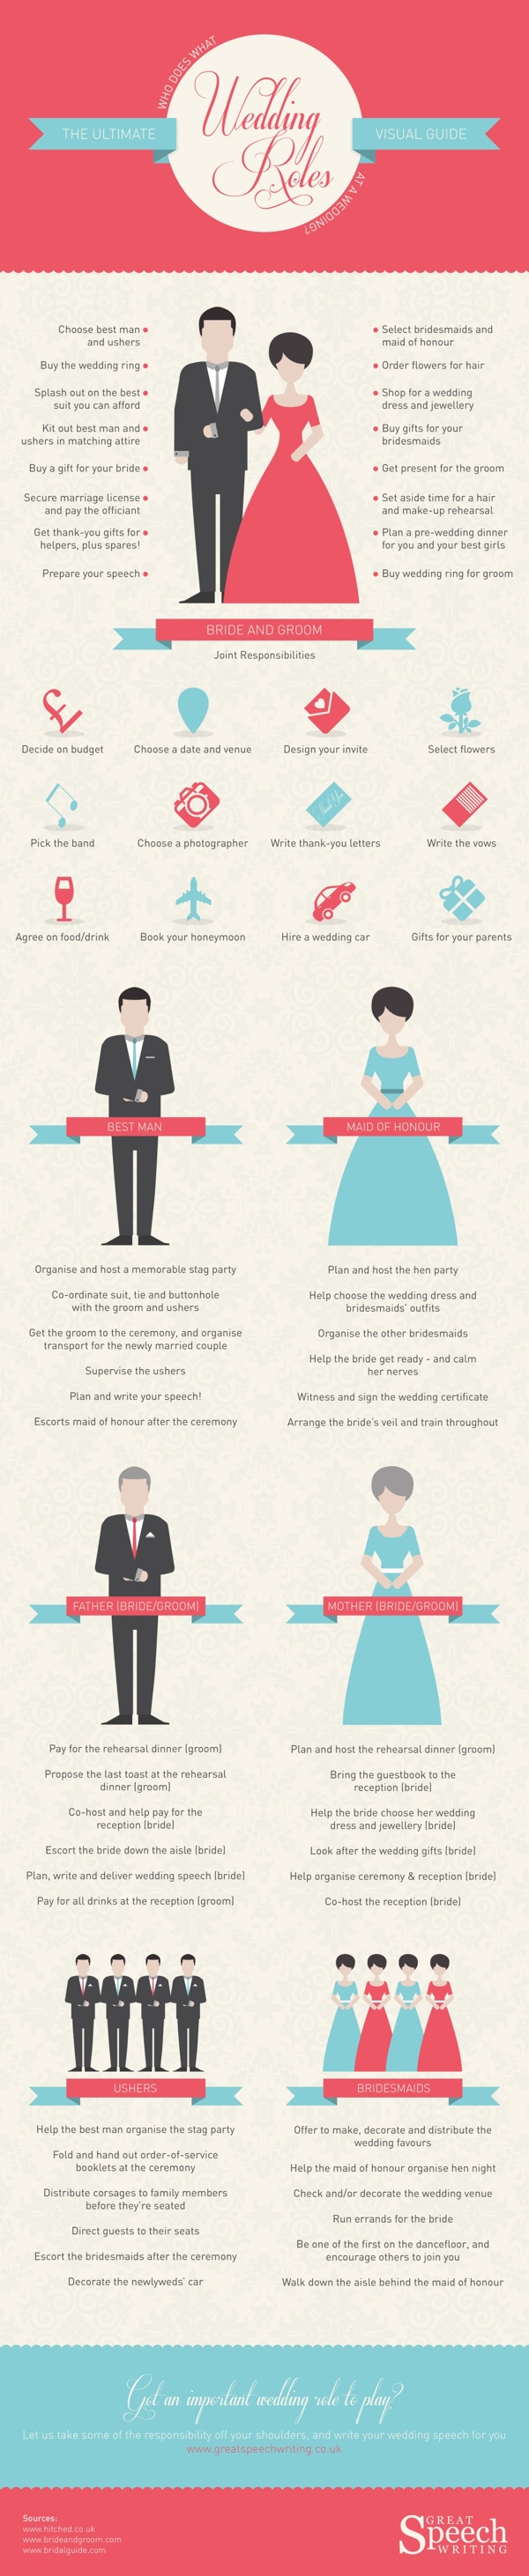 An Infographic Guide to Wedding Roles